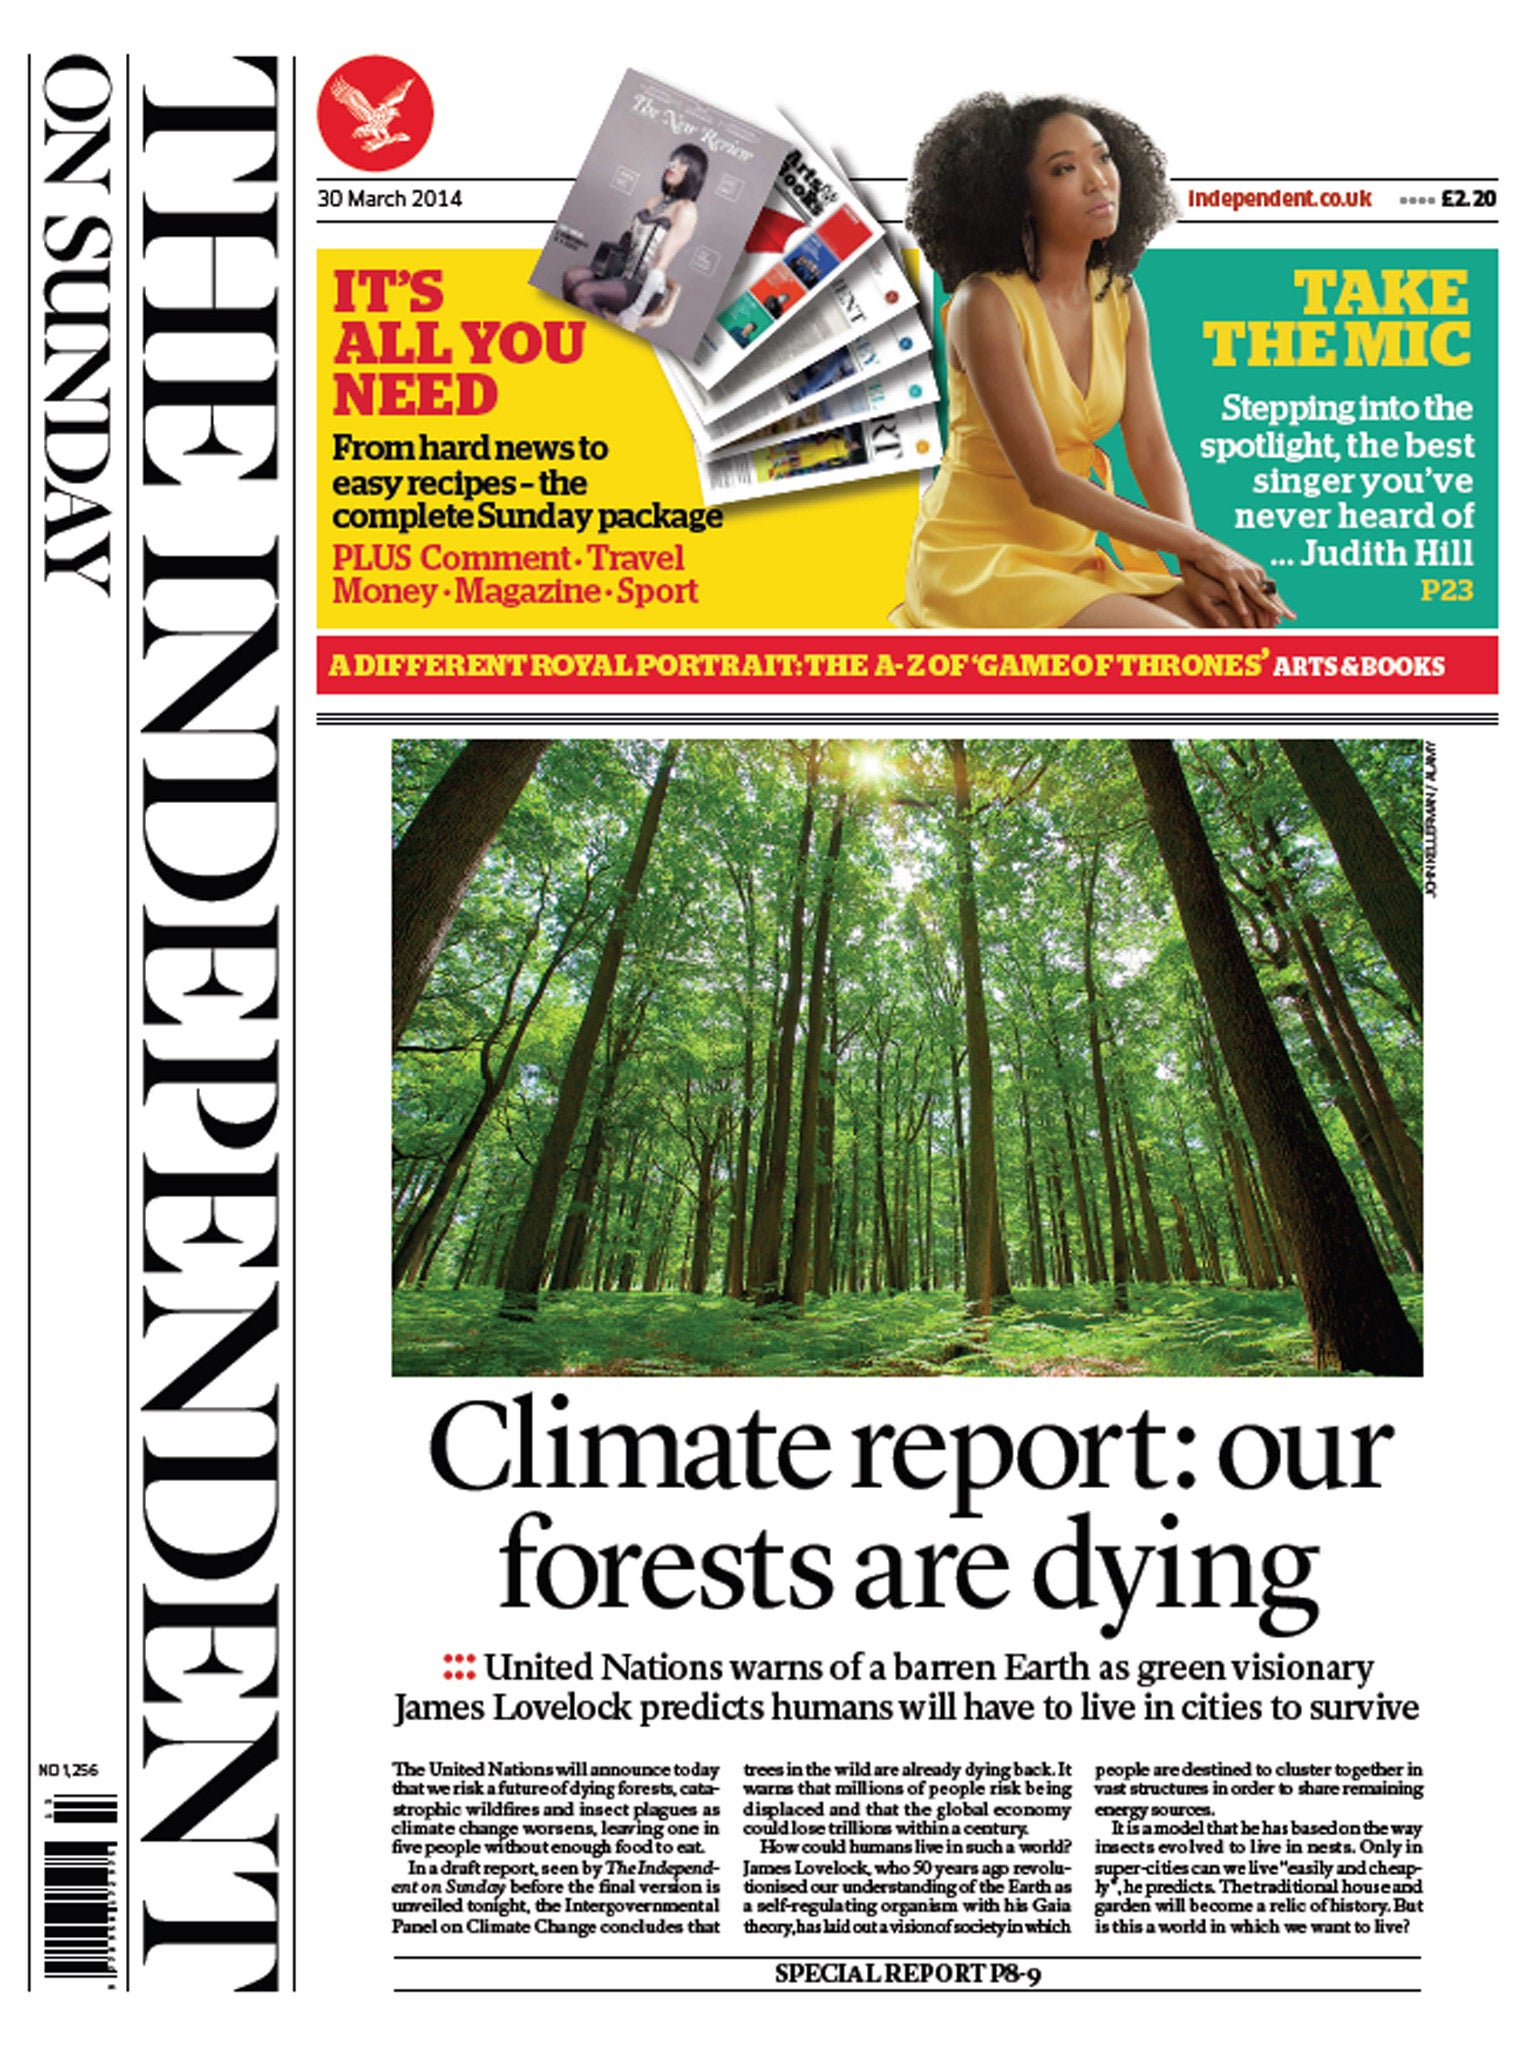 The front page of the most recent edition of the Independent on Sunday